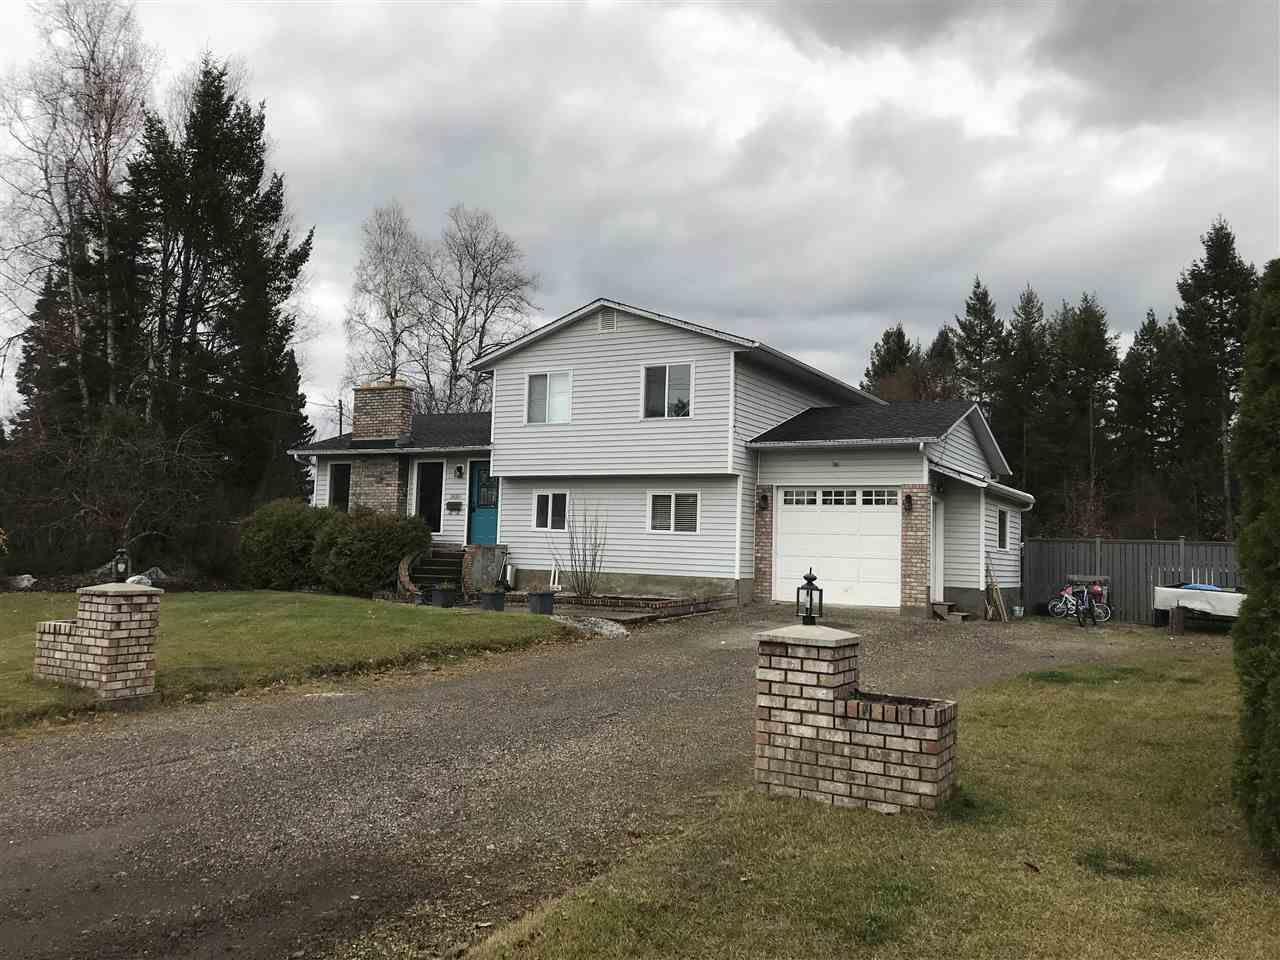 Main Photo: 2650 INGALA Place in Prince George: Ingala House for sale (PG City North (Zone 73))  : MLS®# R2220348